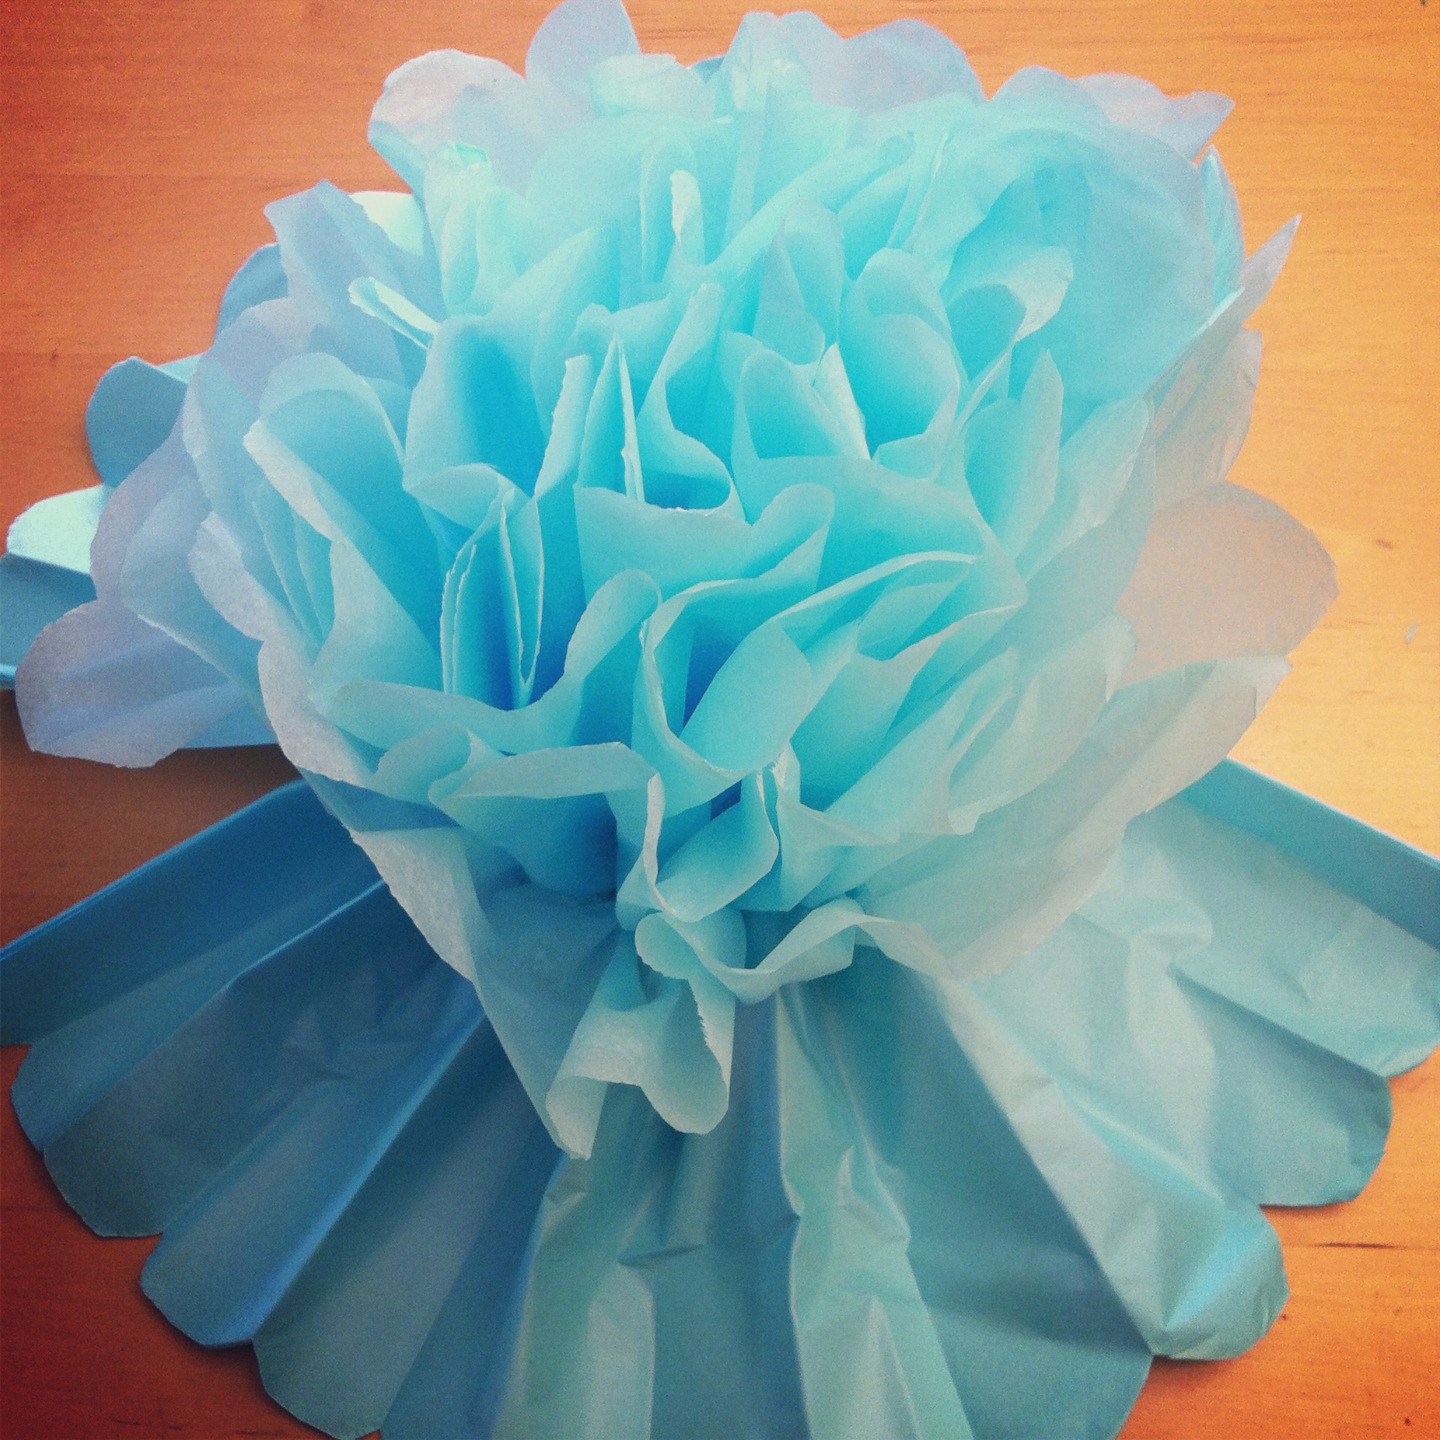 Tissue Paper Decorations DIY
 Tutorial How To Make DIY Giant Tissue Paper Flowers